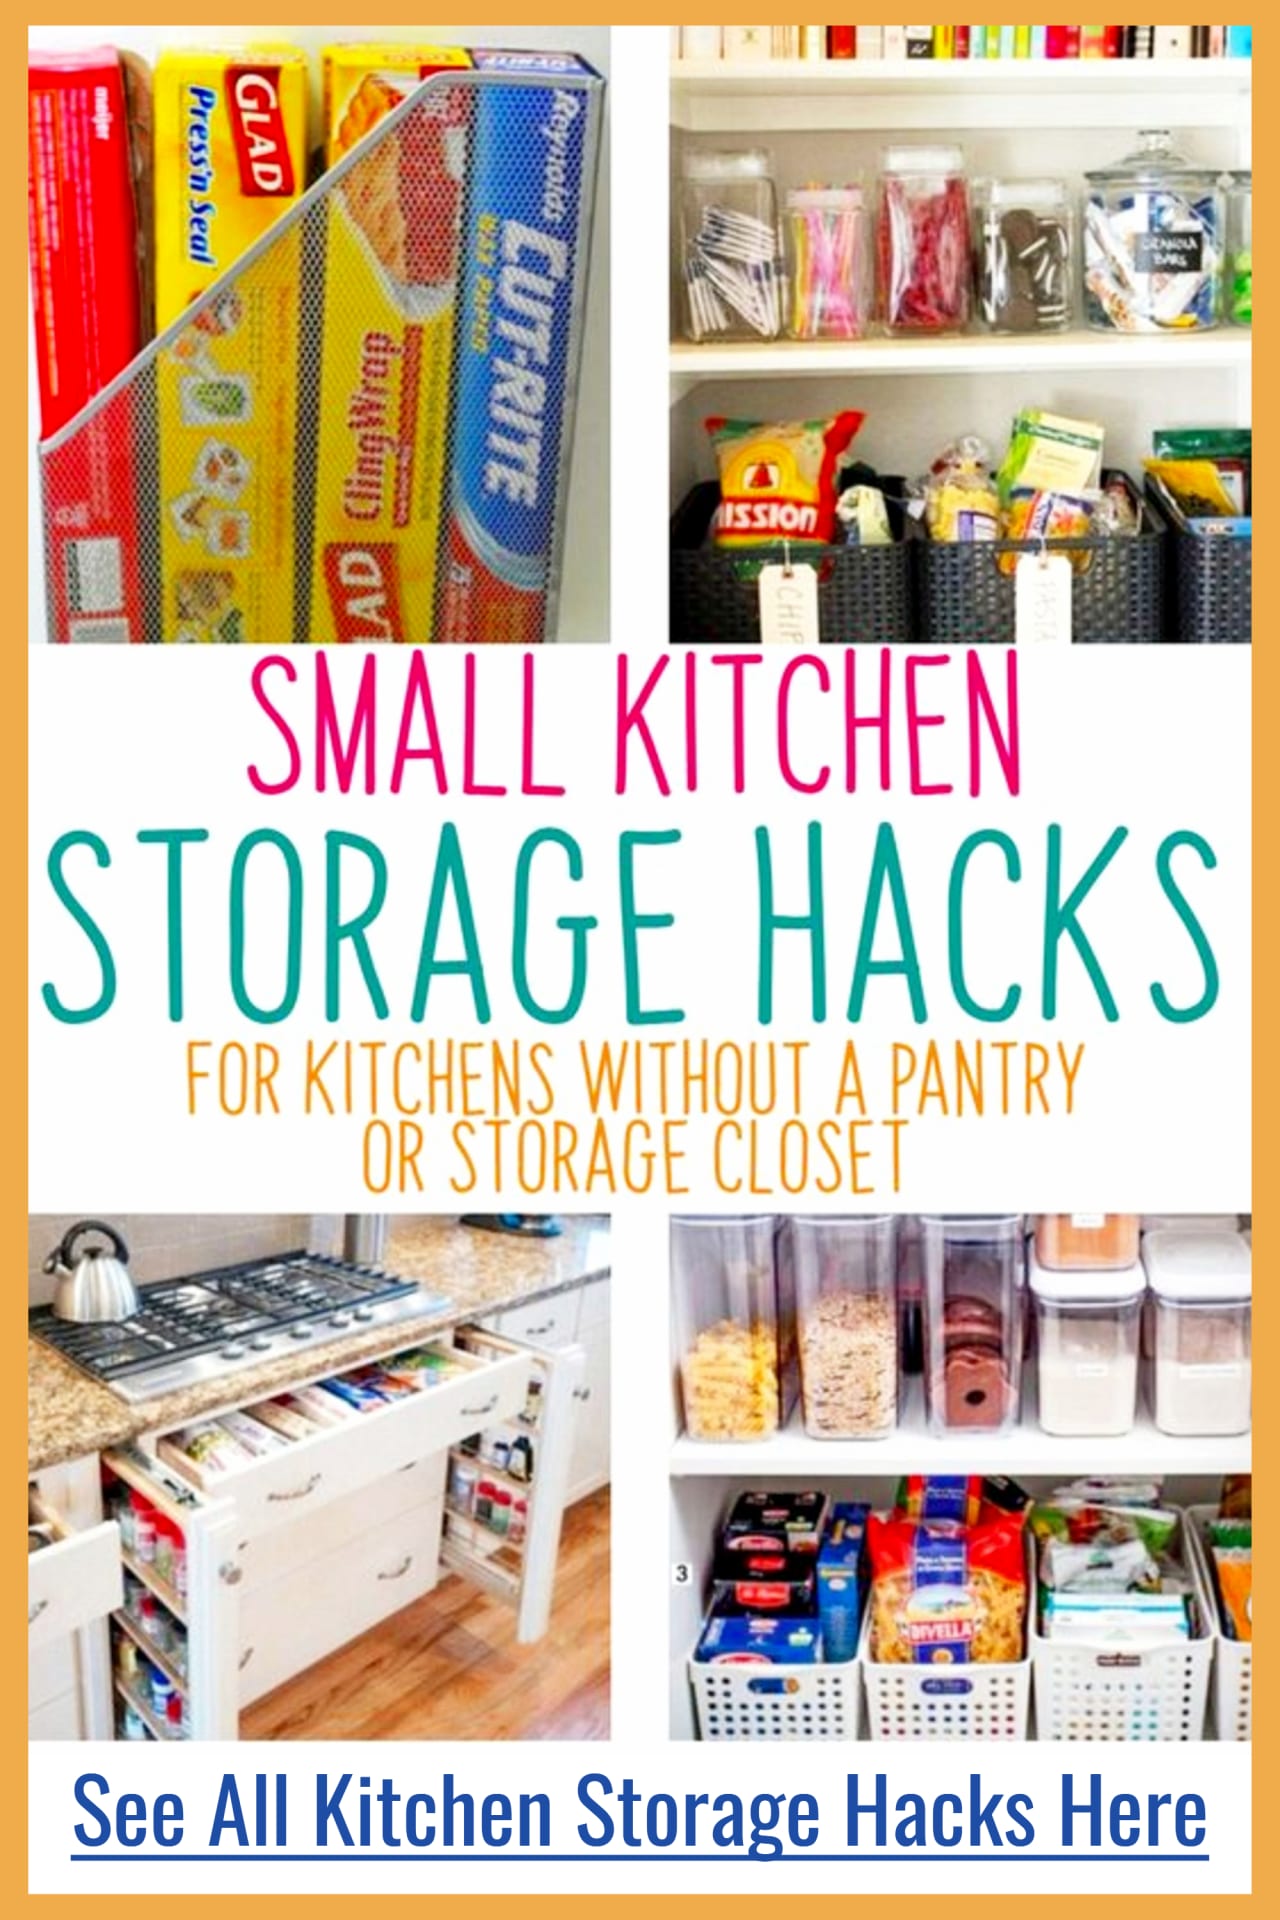 Kitchen Organization - Small Kitchen Organization Ideas for tiny kitchens with no pantry cabinet.  DIY kitchen dollar store organization ideas